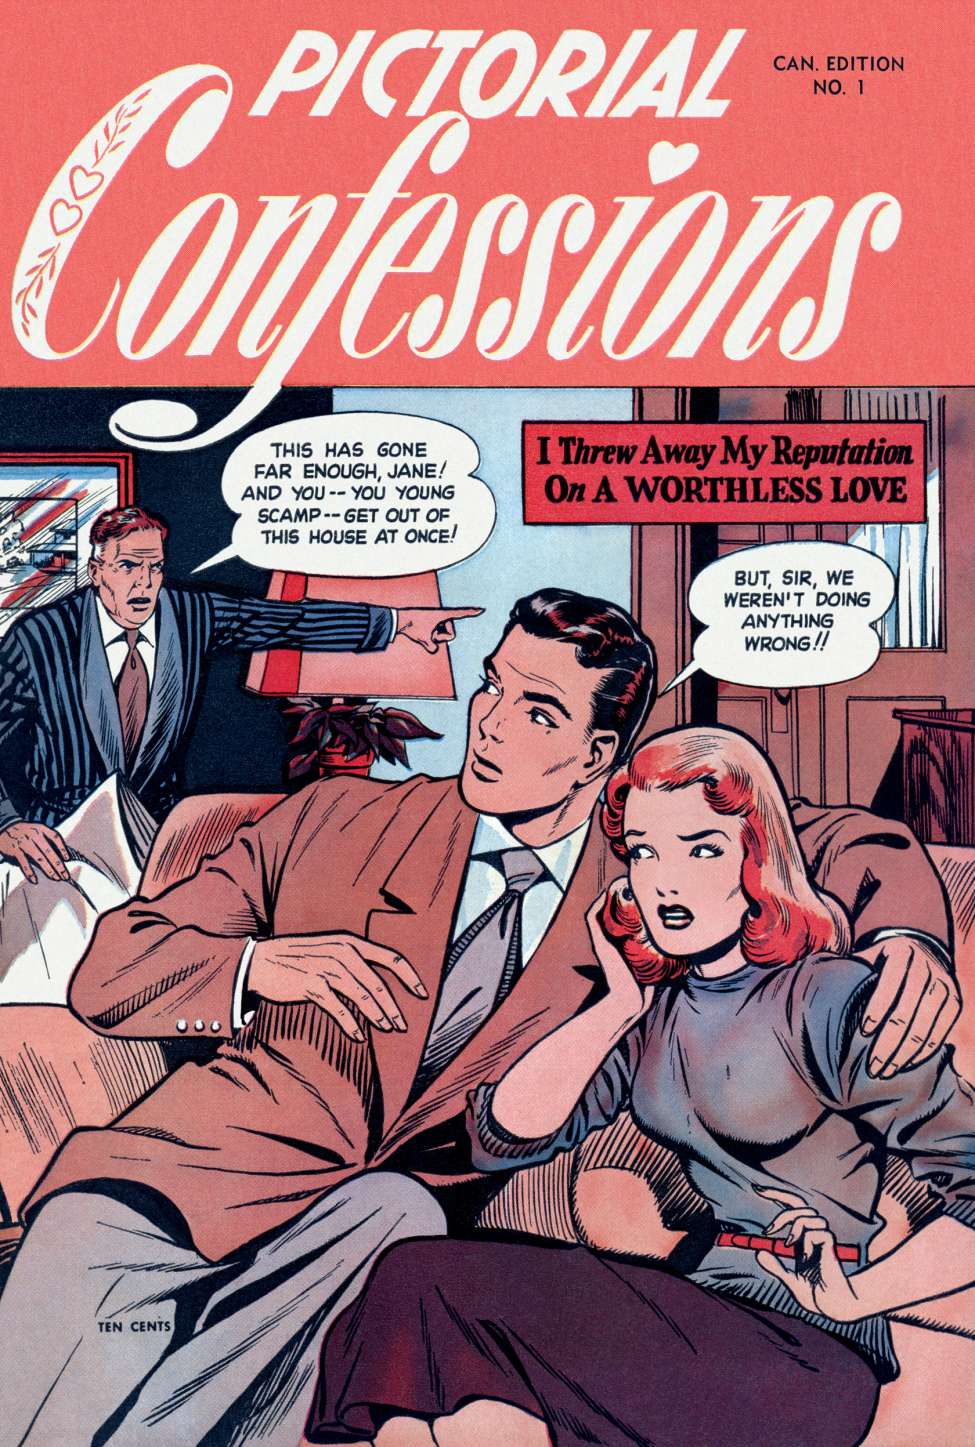 Comic Book Cover For Pictorial Confessions 1